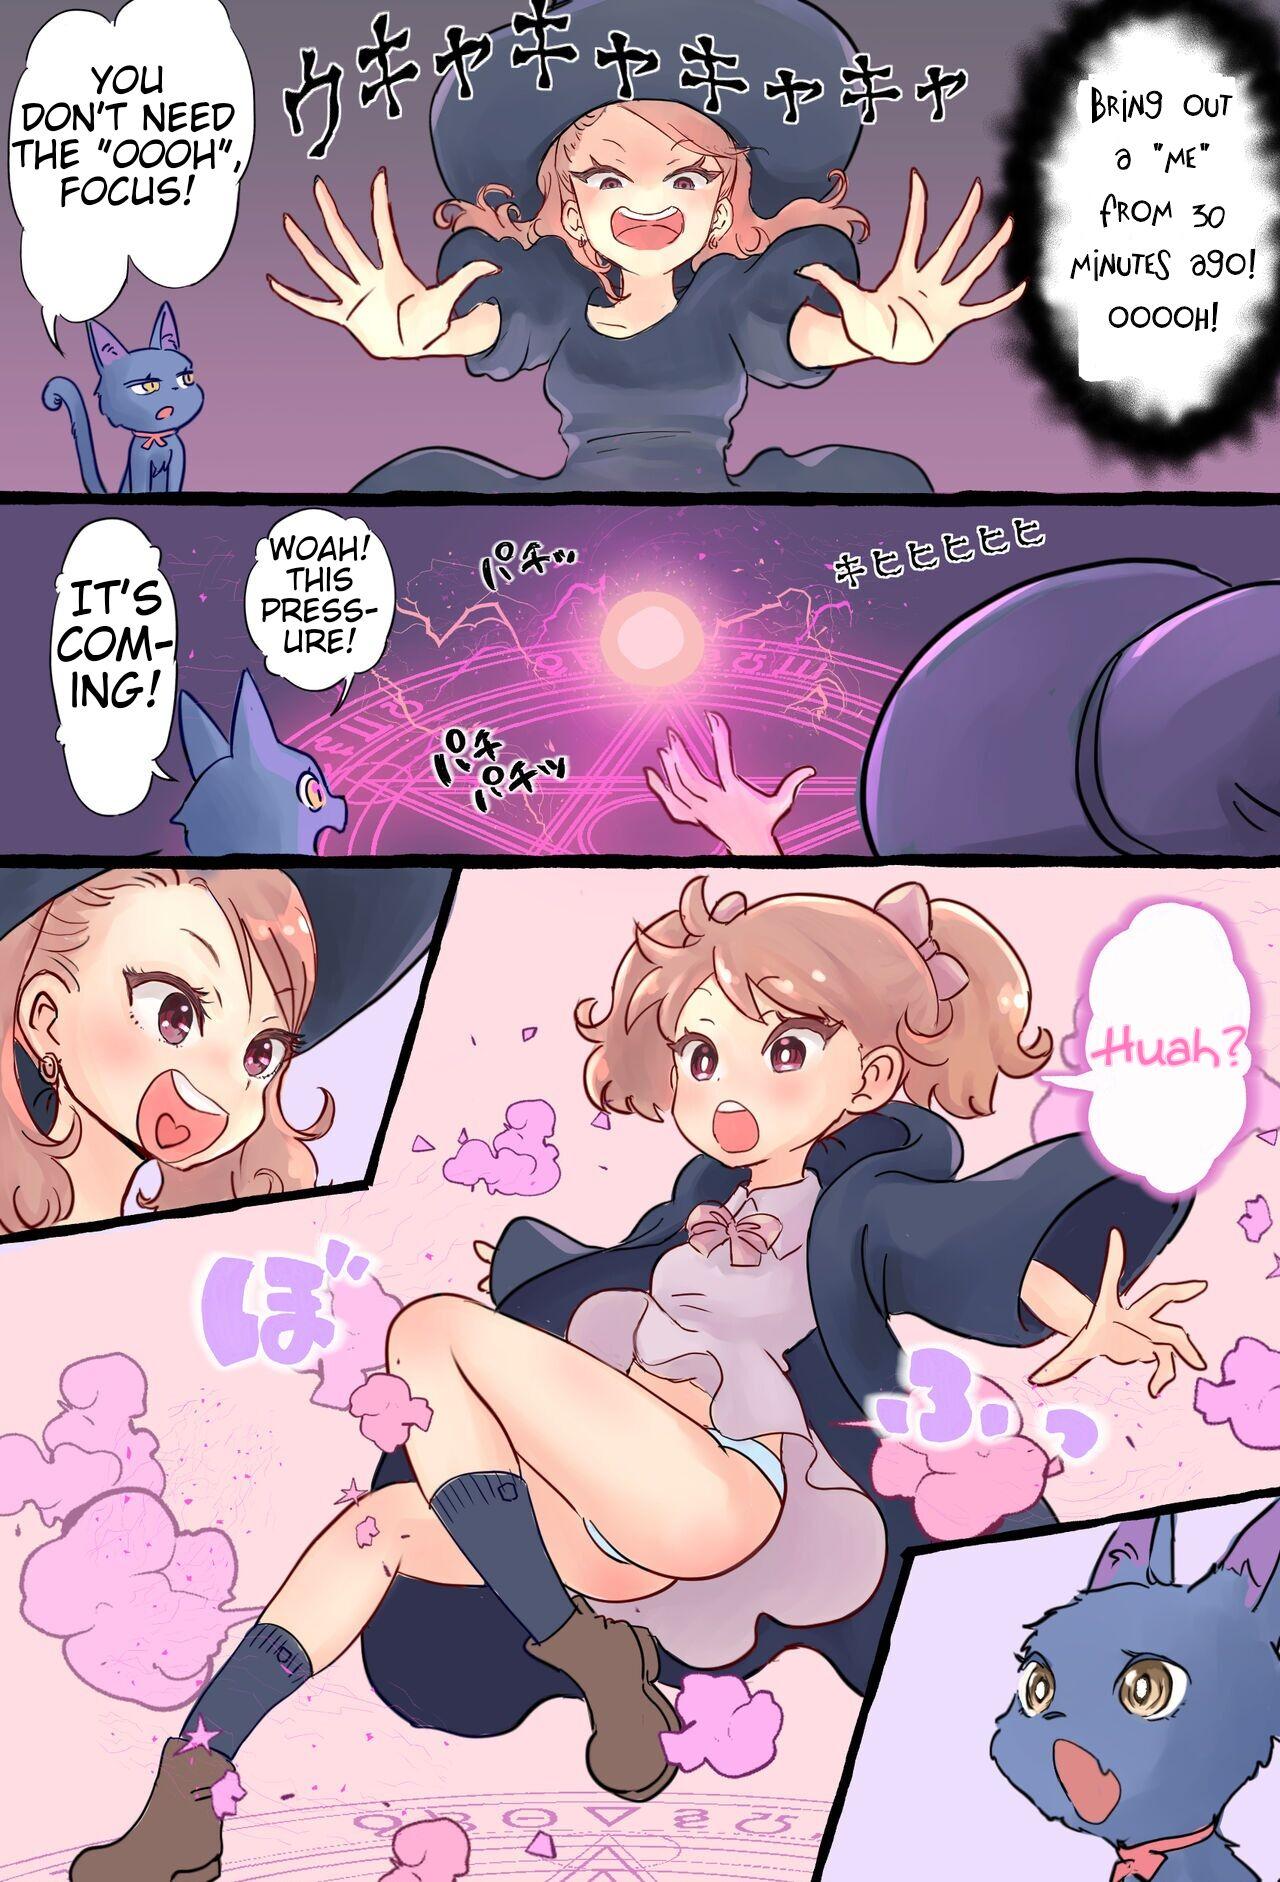 A story about a futanari witch who summons her past self with summoning magic and has sex with her smaller self 5